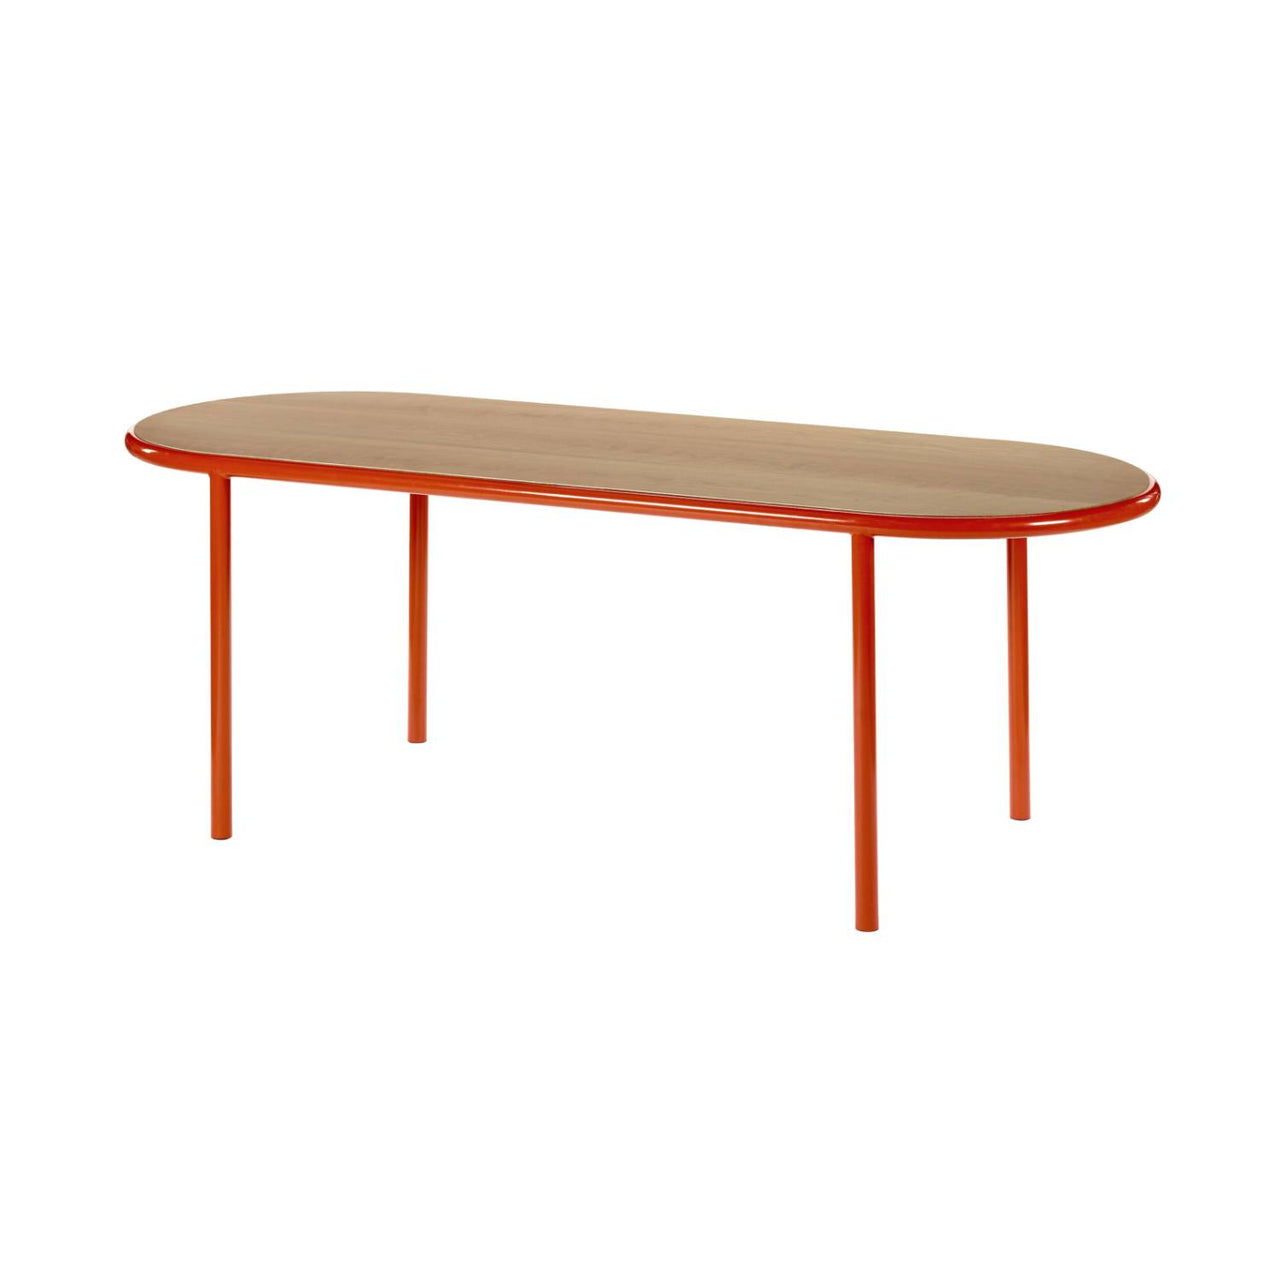 Wooden Table: Oval + Cherry + Red